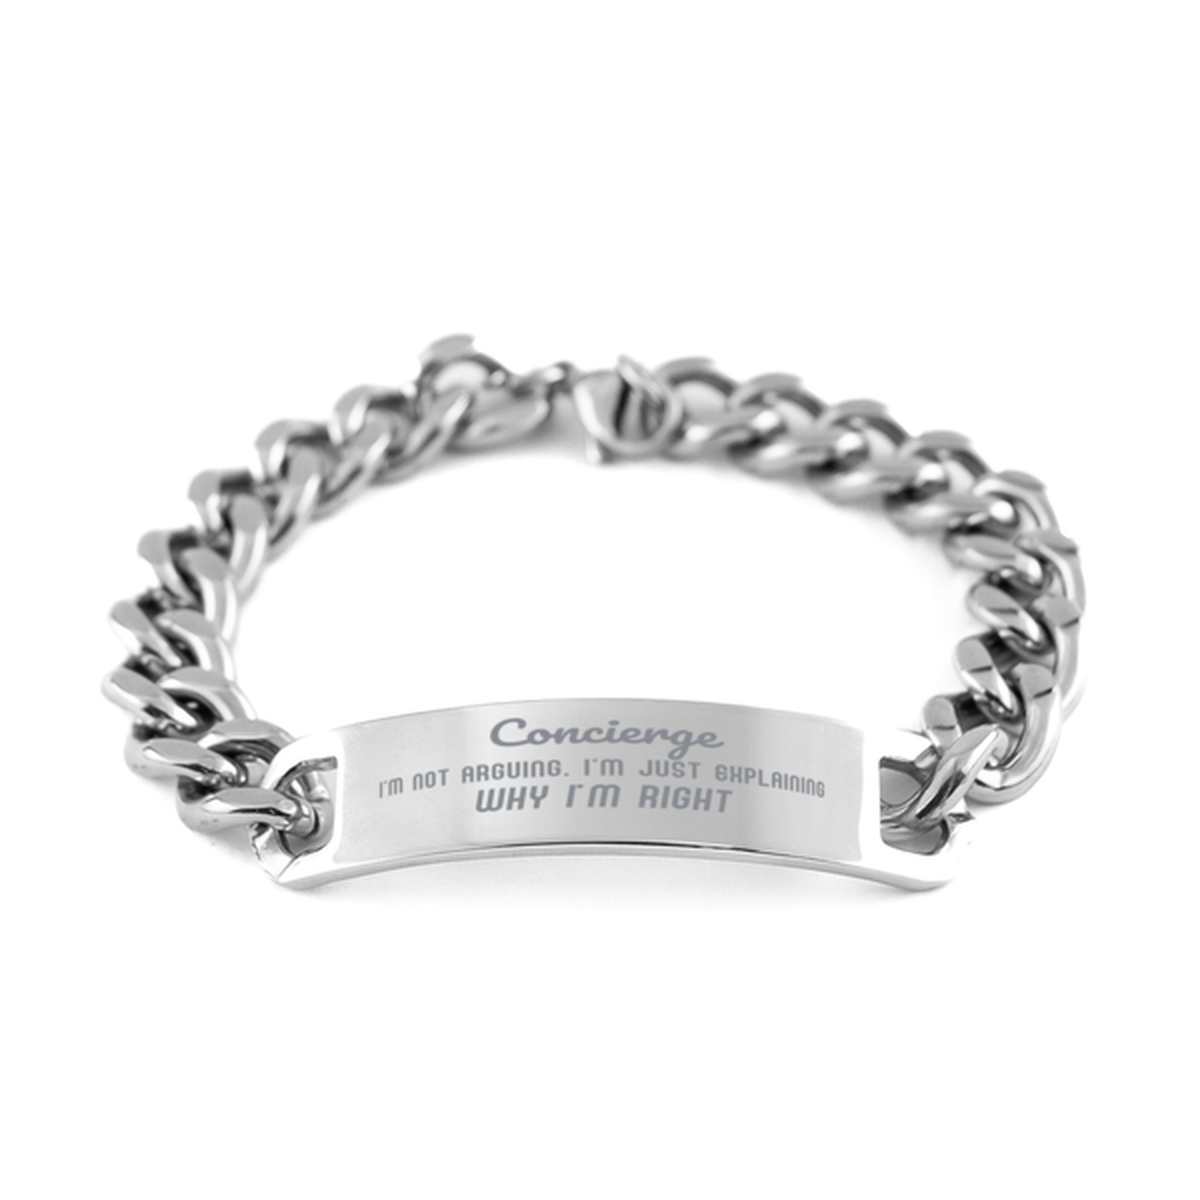 Concierge I'm not Arguing. I'm Just Explaining Why I'm RIGHT Cuban Chain Stainless Steel Bracelet, Graduation Birthday Christmas Concierge Gifts For Concierge Funny Saying Quote Present for Men Women Coworker